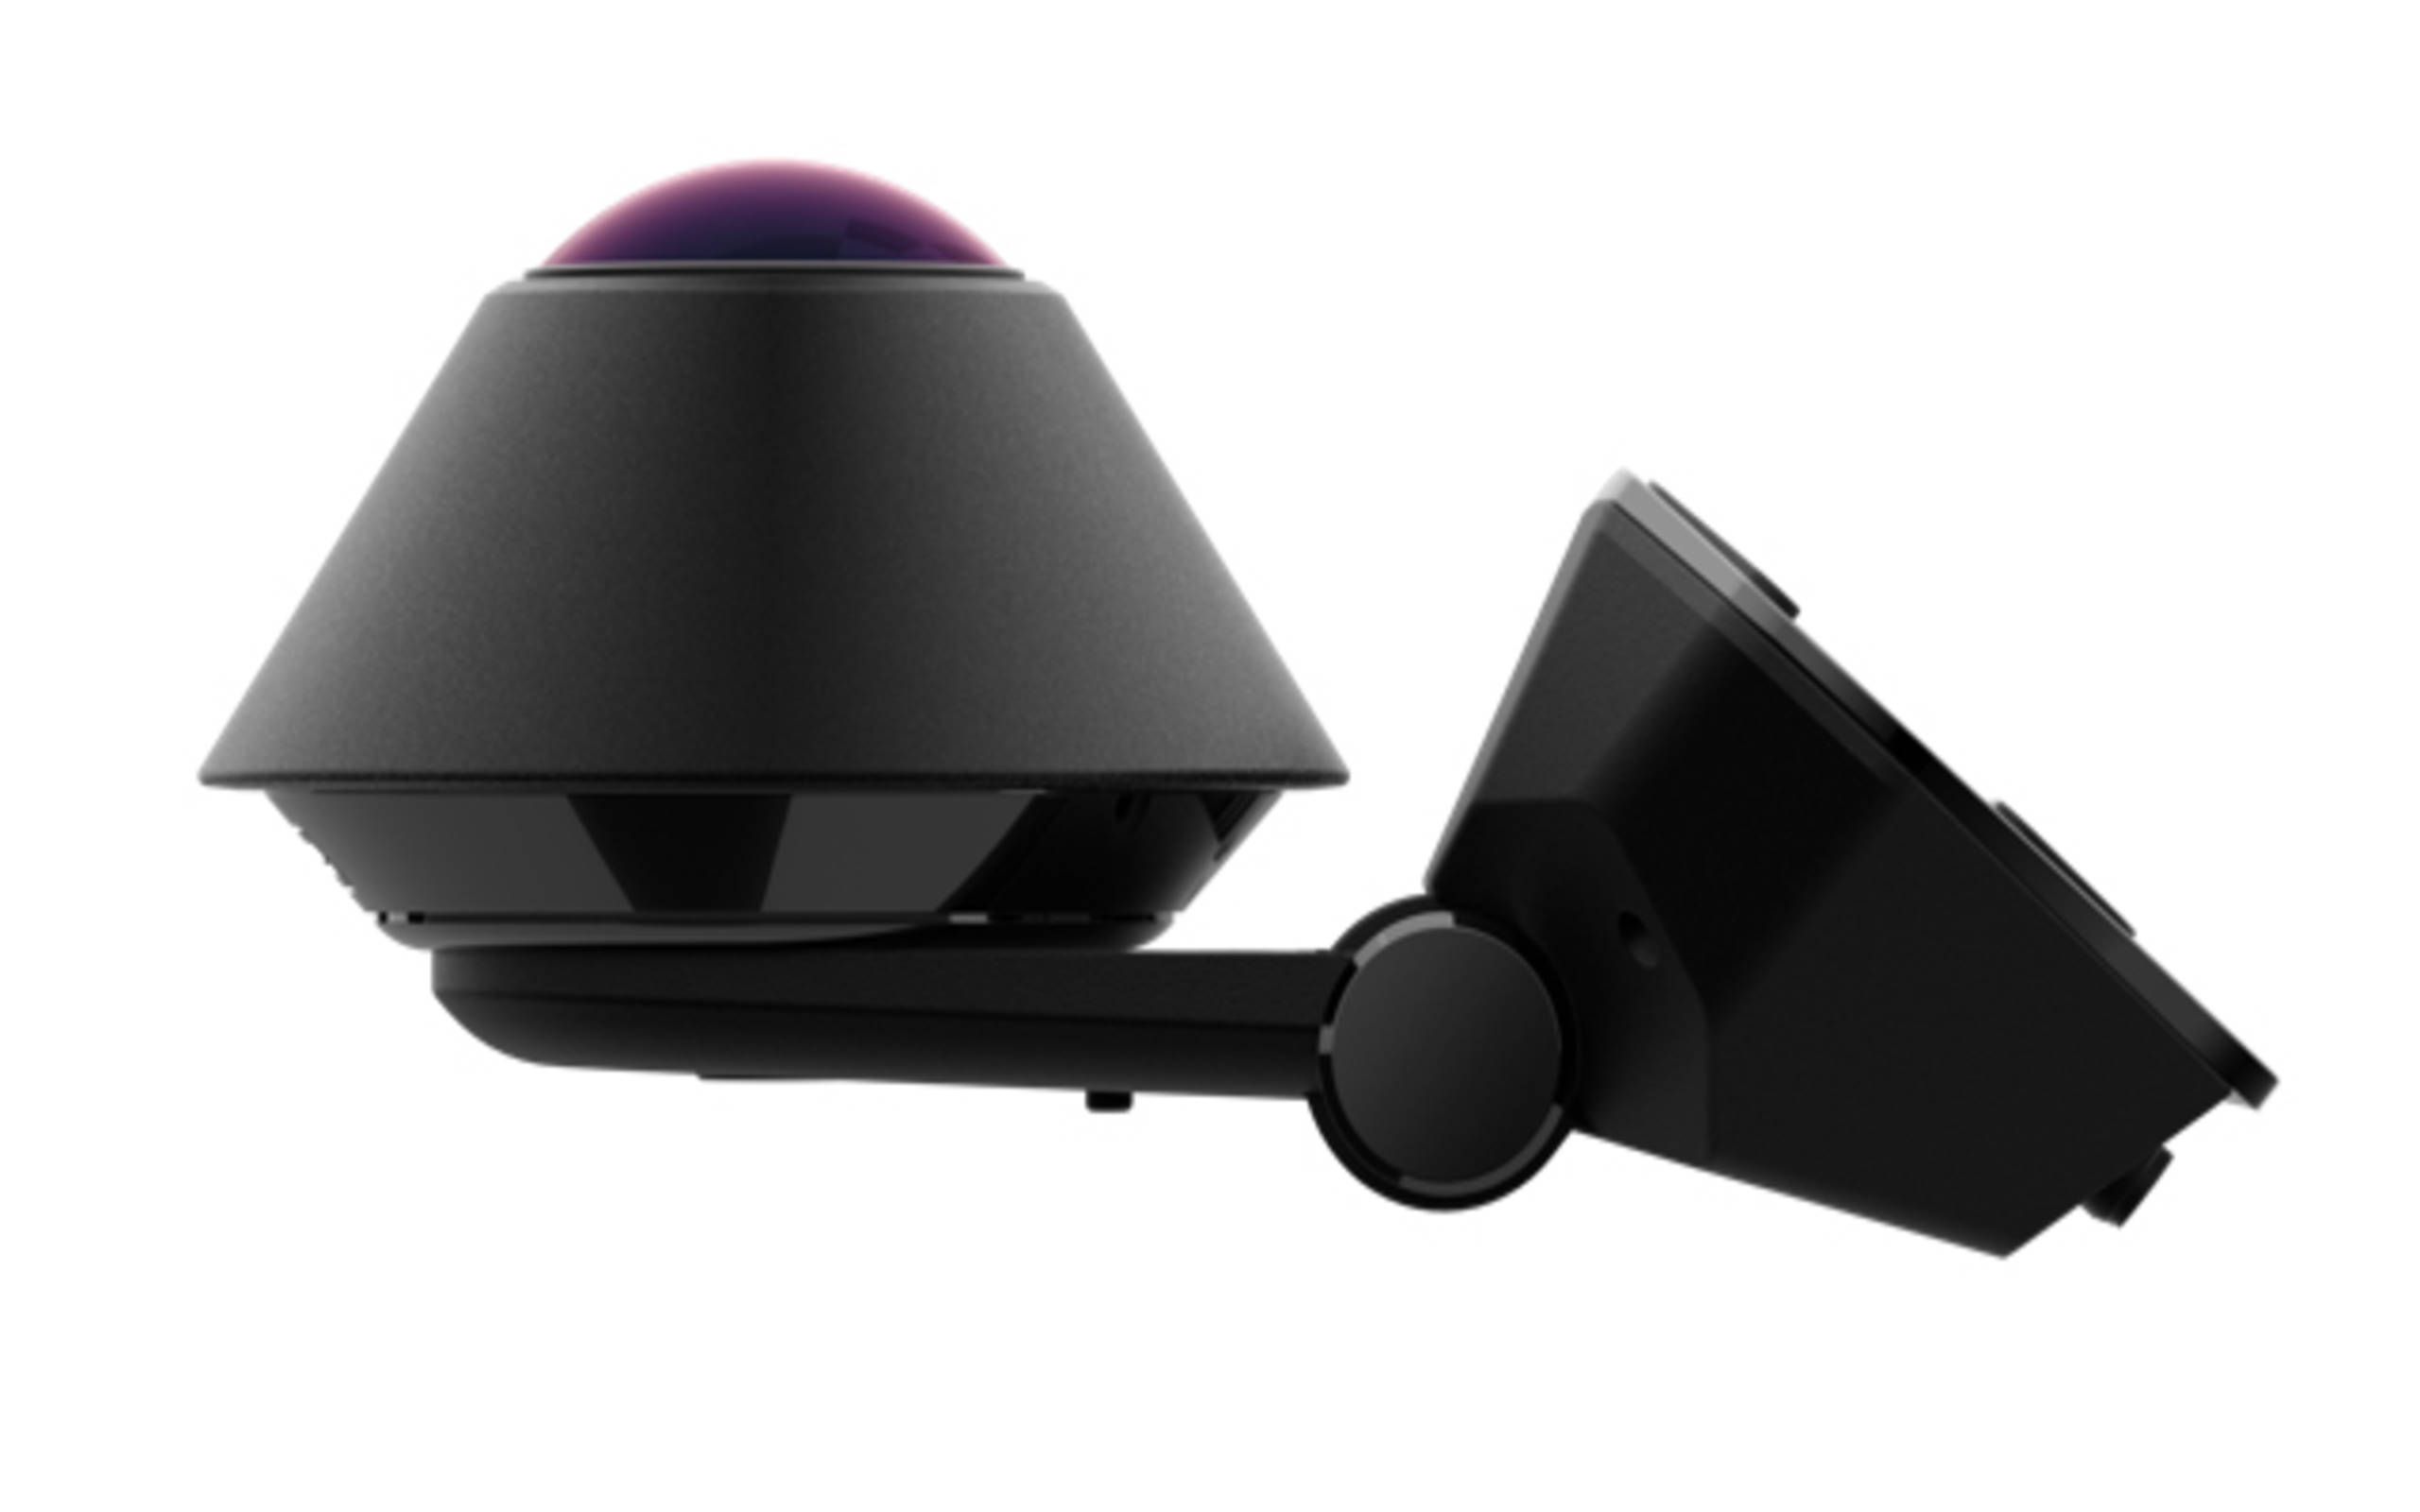 Waylens 360 dash cam sees everything and alerts you if someone tries to  steal your car